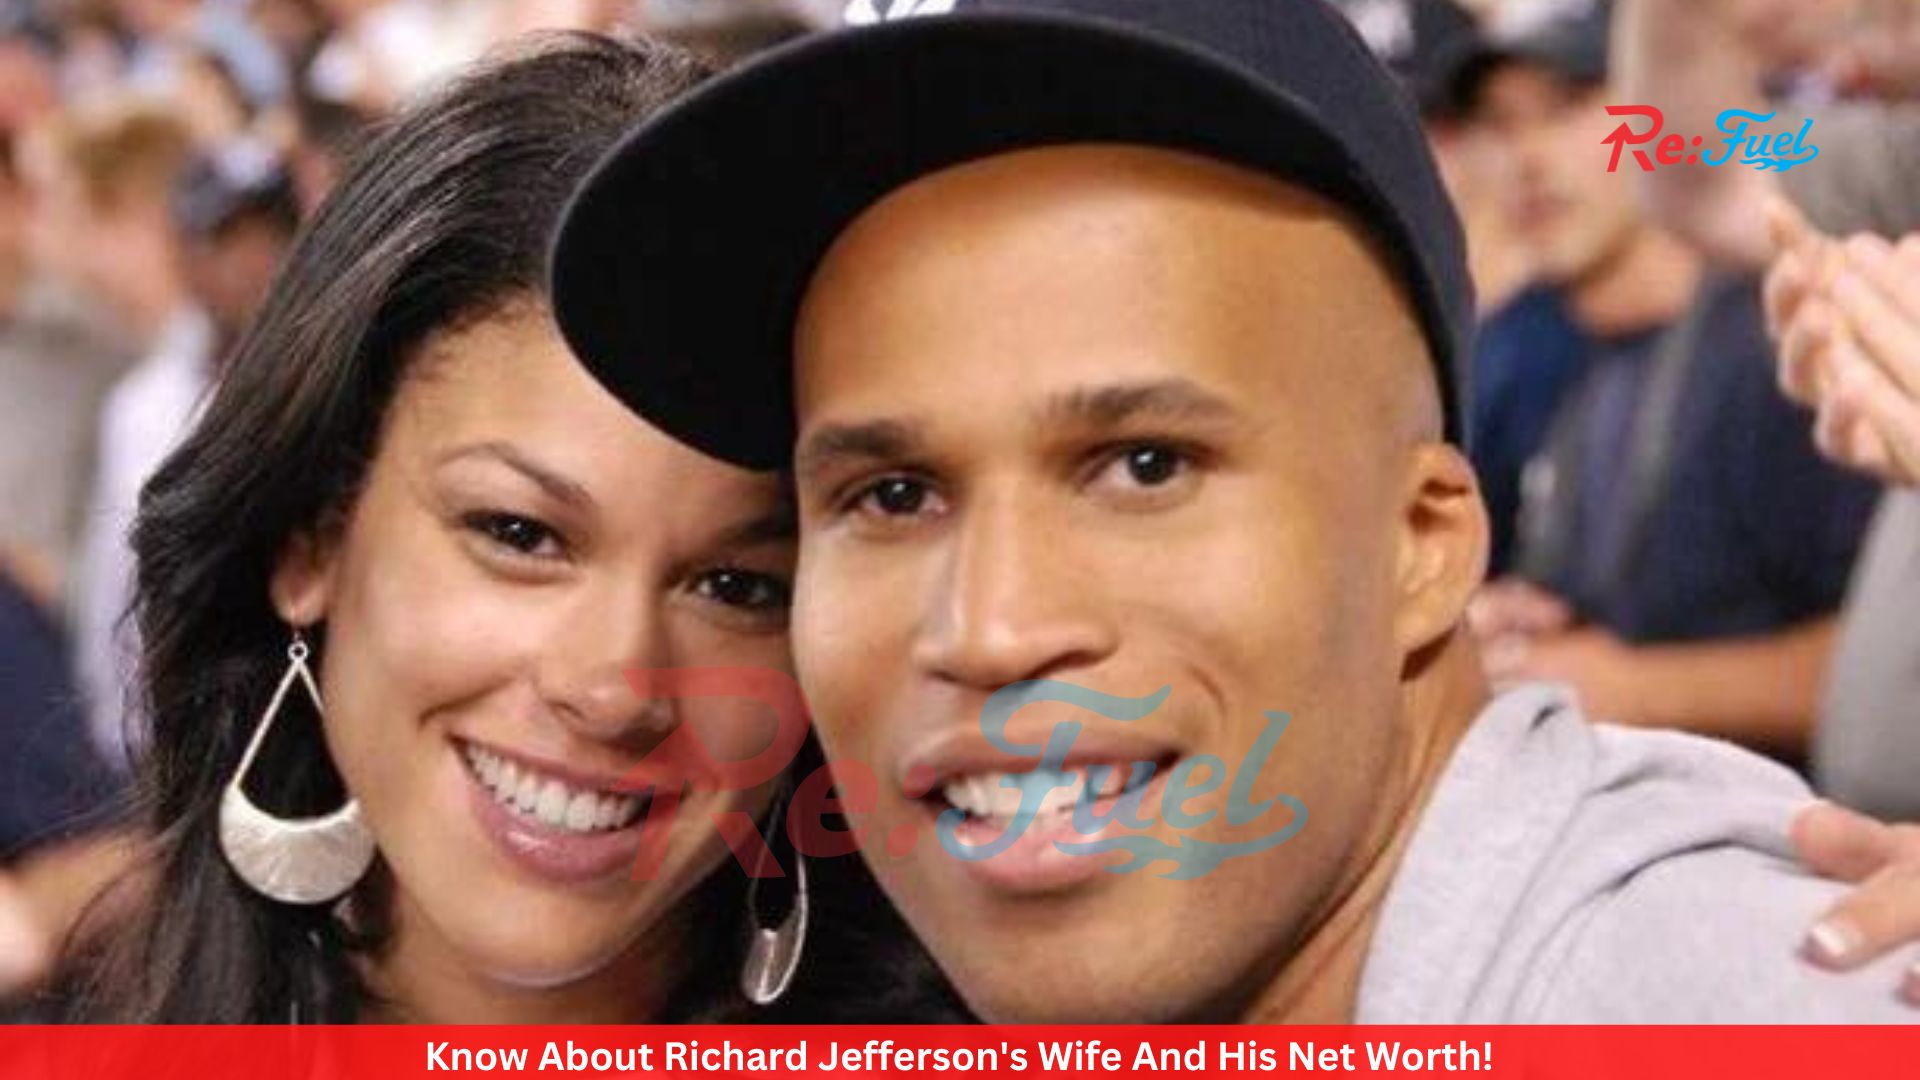 Know About Richard Jefferson's Wife And His Net Worth!